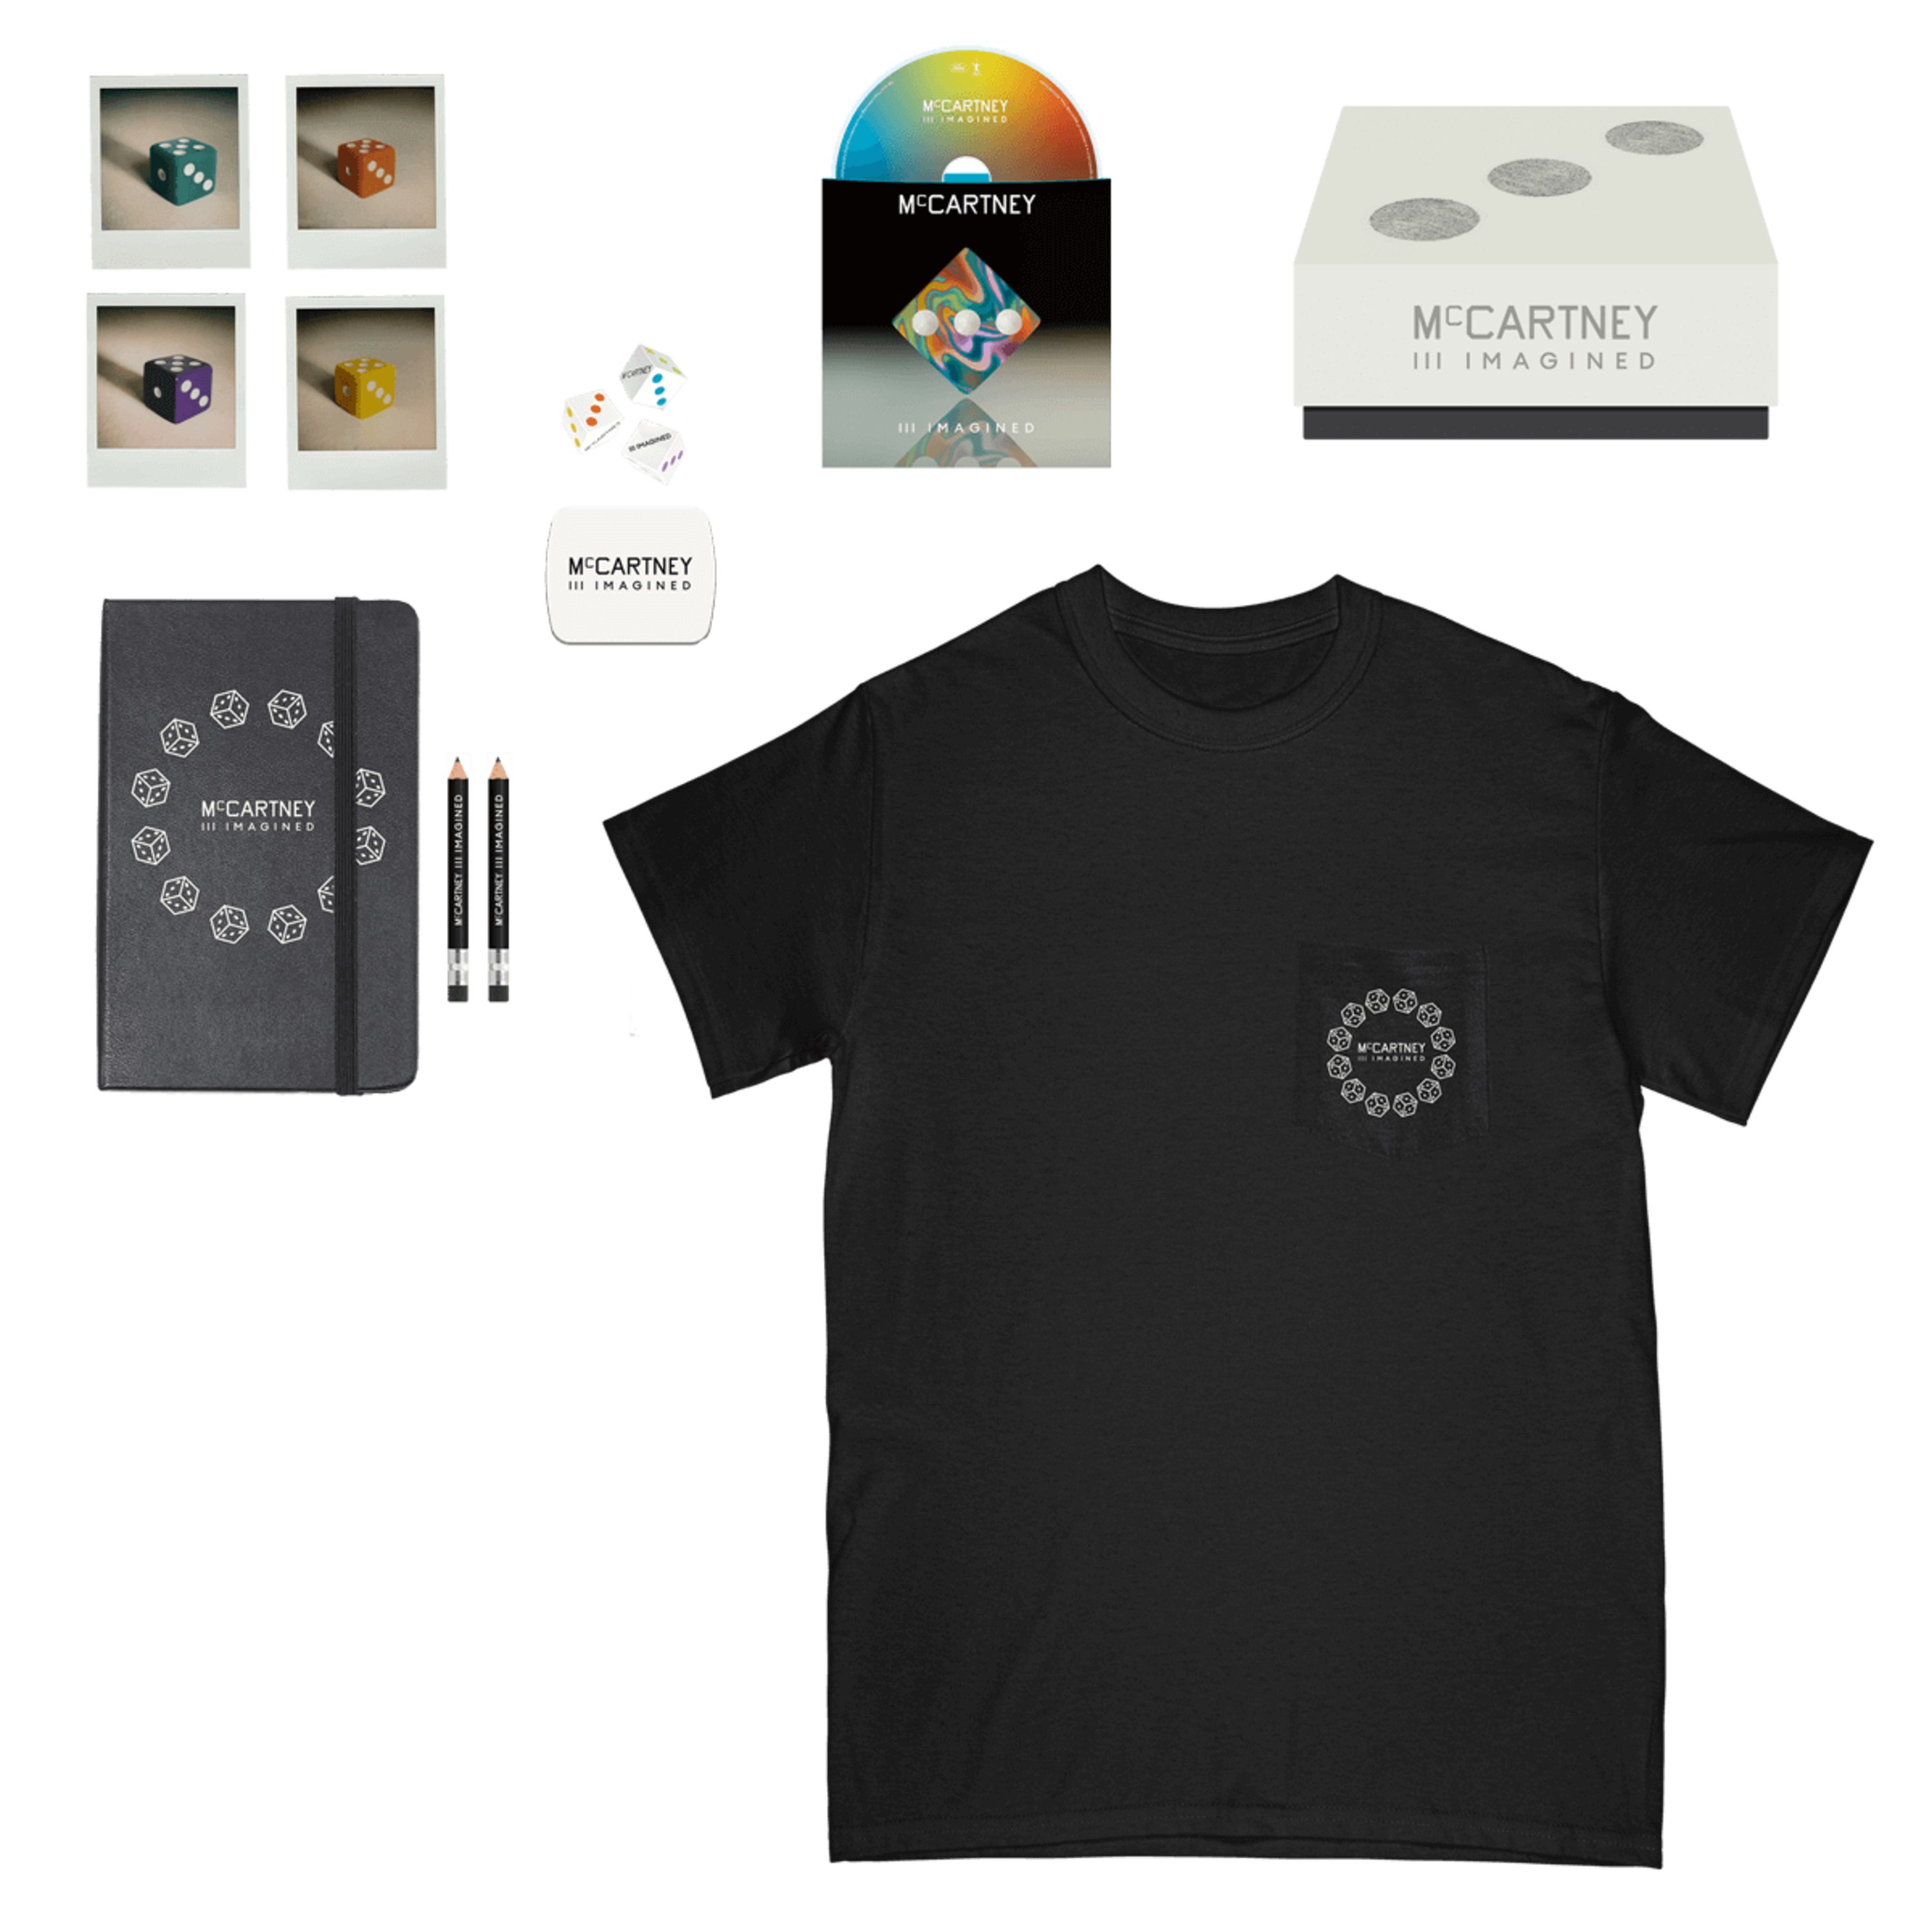 uDiscover Germany - Official Store - III Imagined (Ltd. Box + 